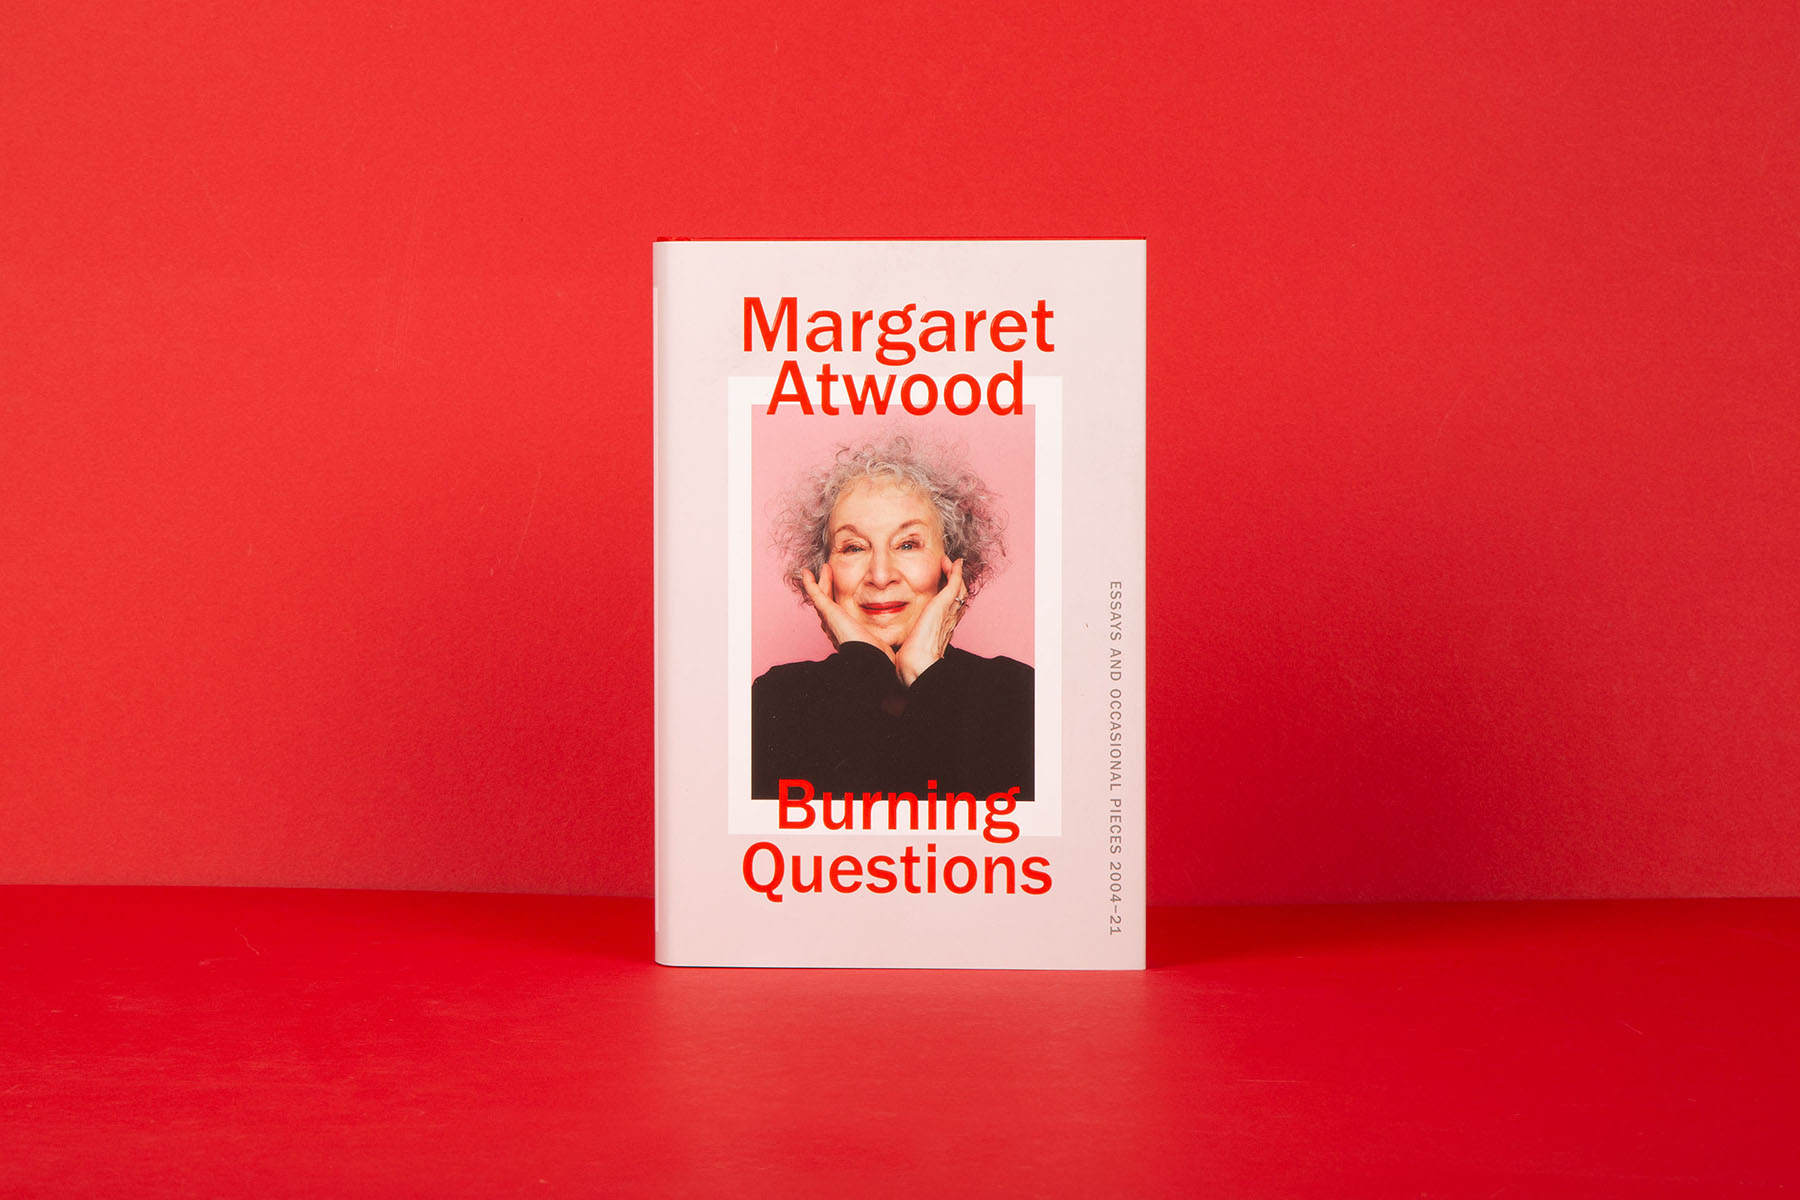 Book, Burning Questions by Margaret Atwood, standing upright against a bright red background